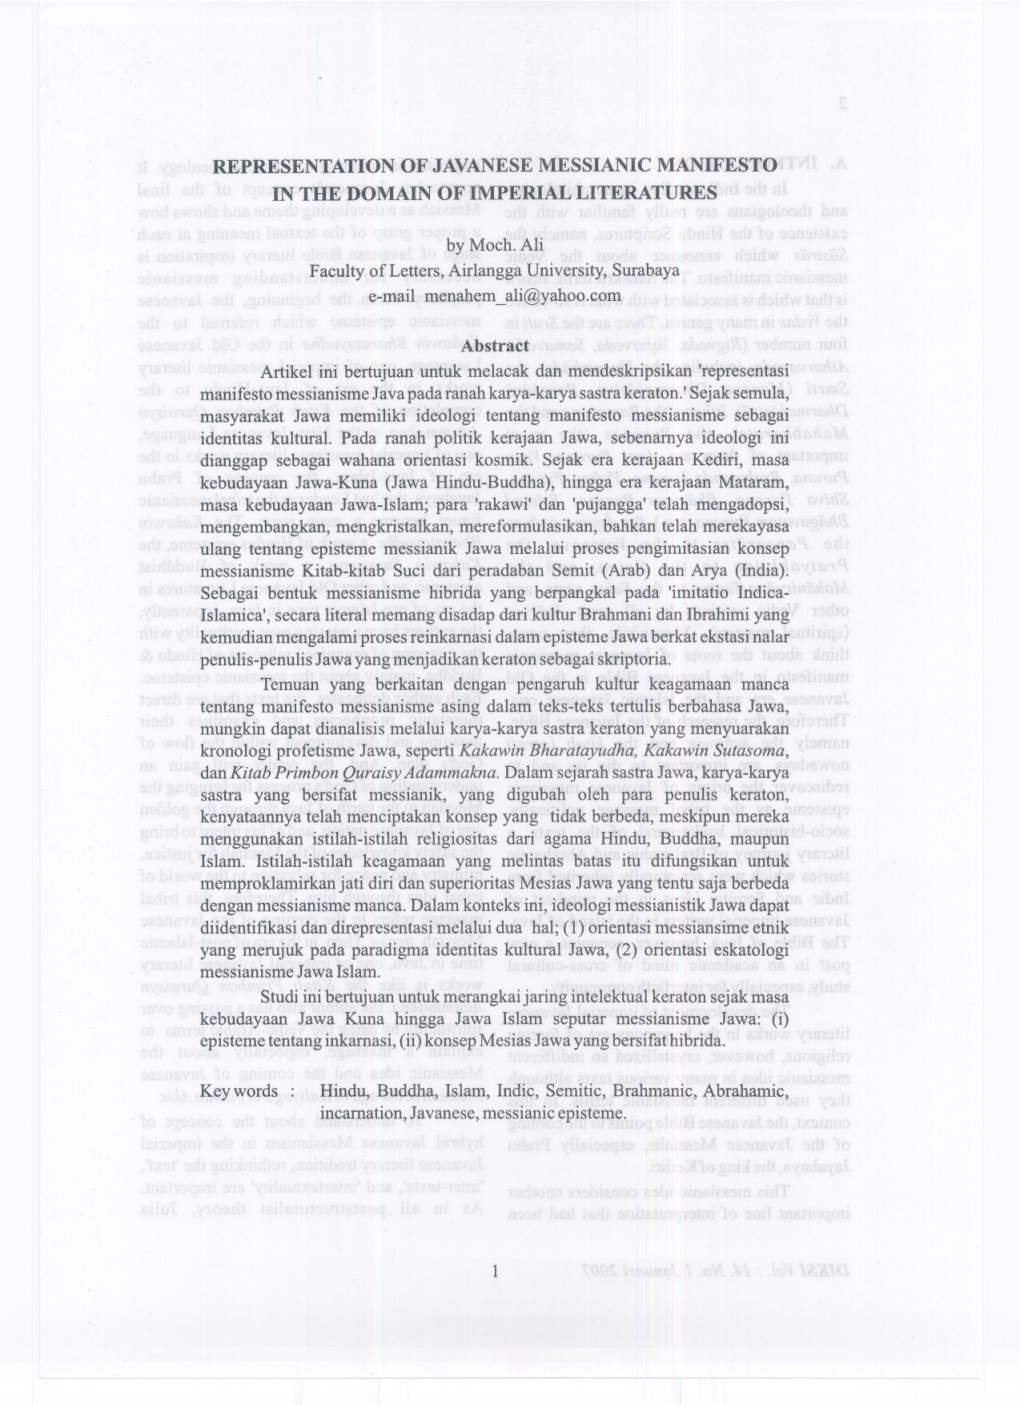 Representation Ofjavanese Messianic Manifesto in the Domain of Imperial Literatures